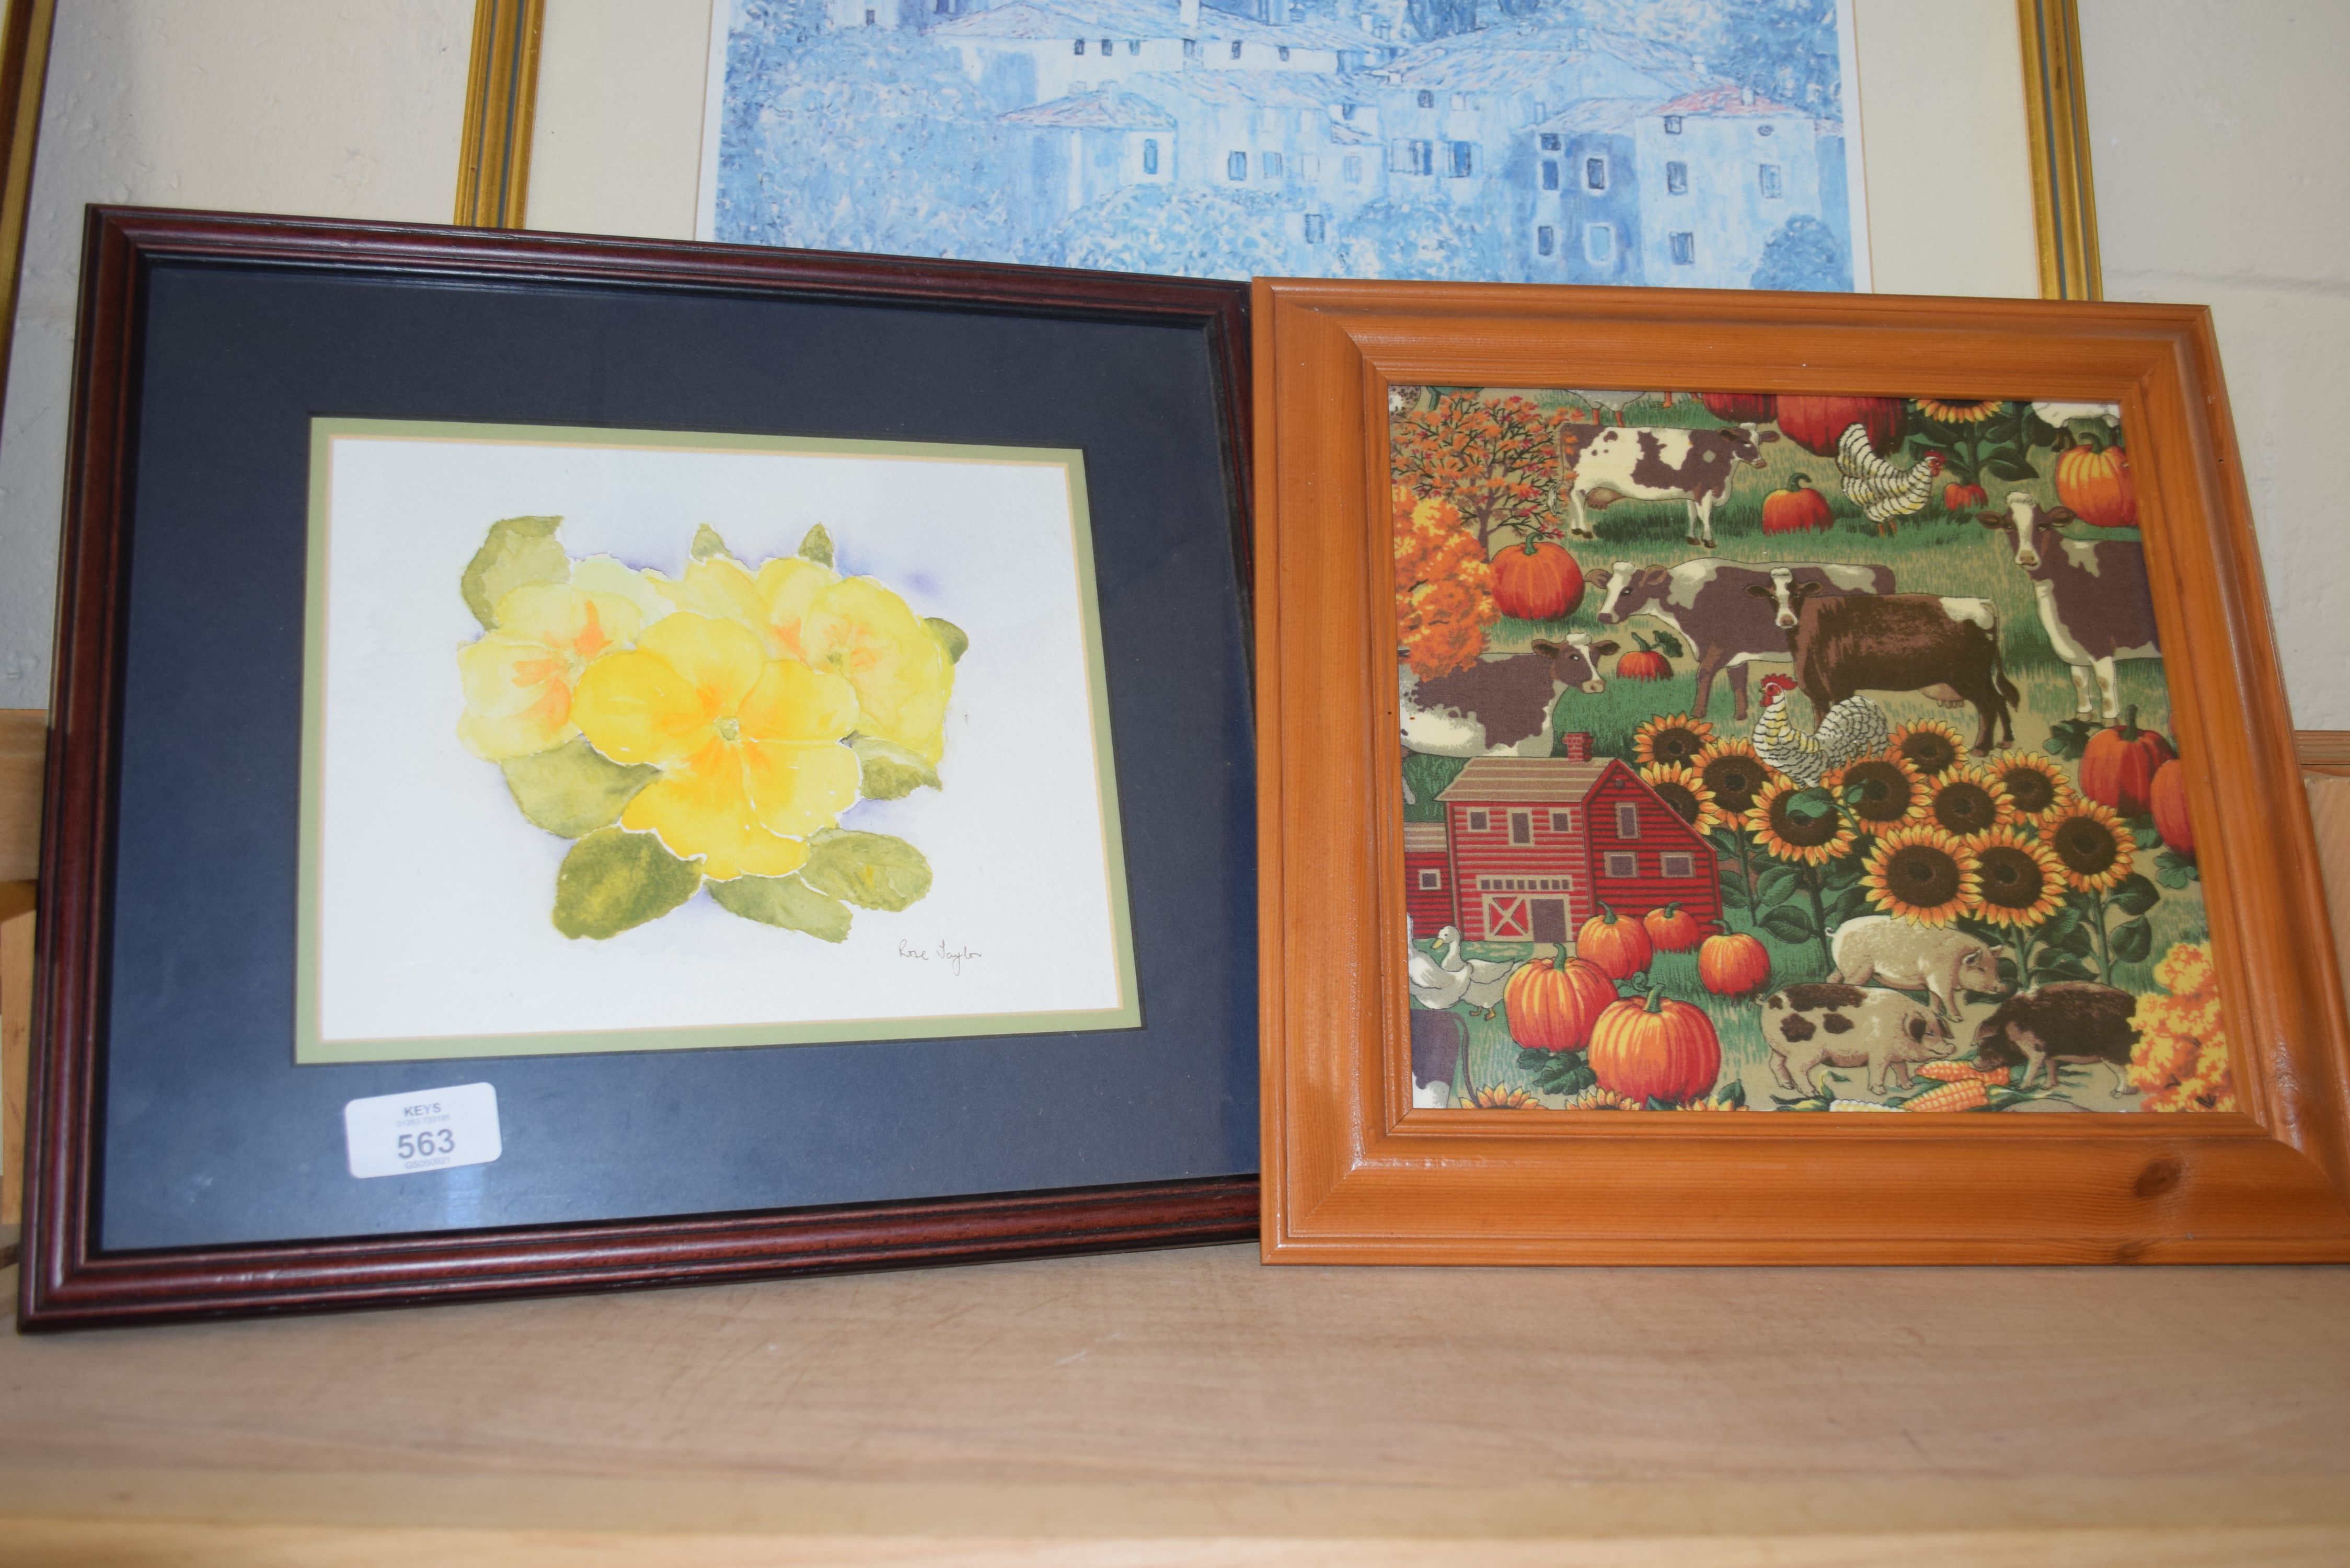 ROSE TAYLOR, A WATERCOLOUR OF PRIMROSES, TOGETHER WITH A COLOURED PRINT OF A FARMYARD SCENE